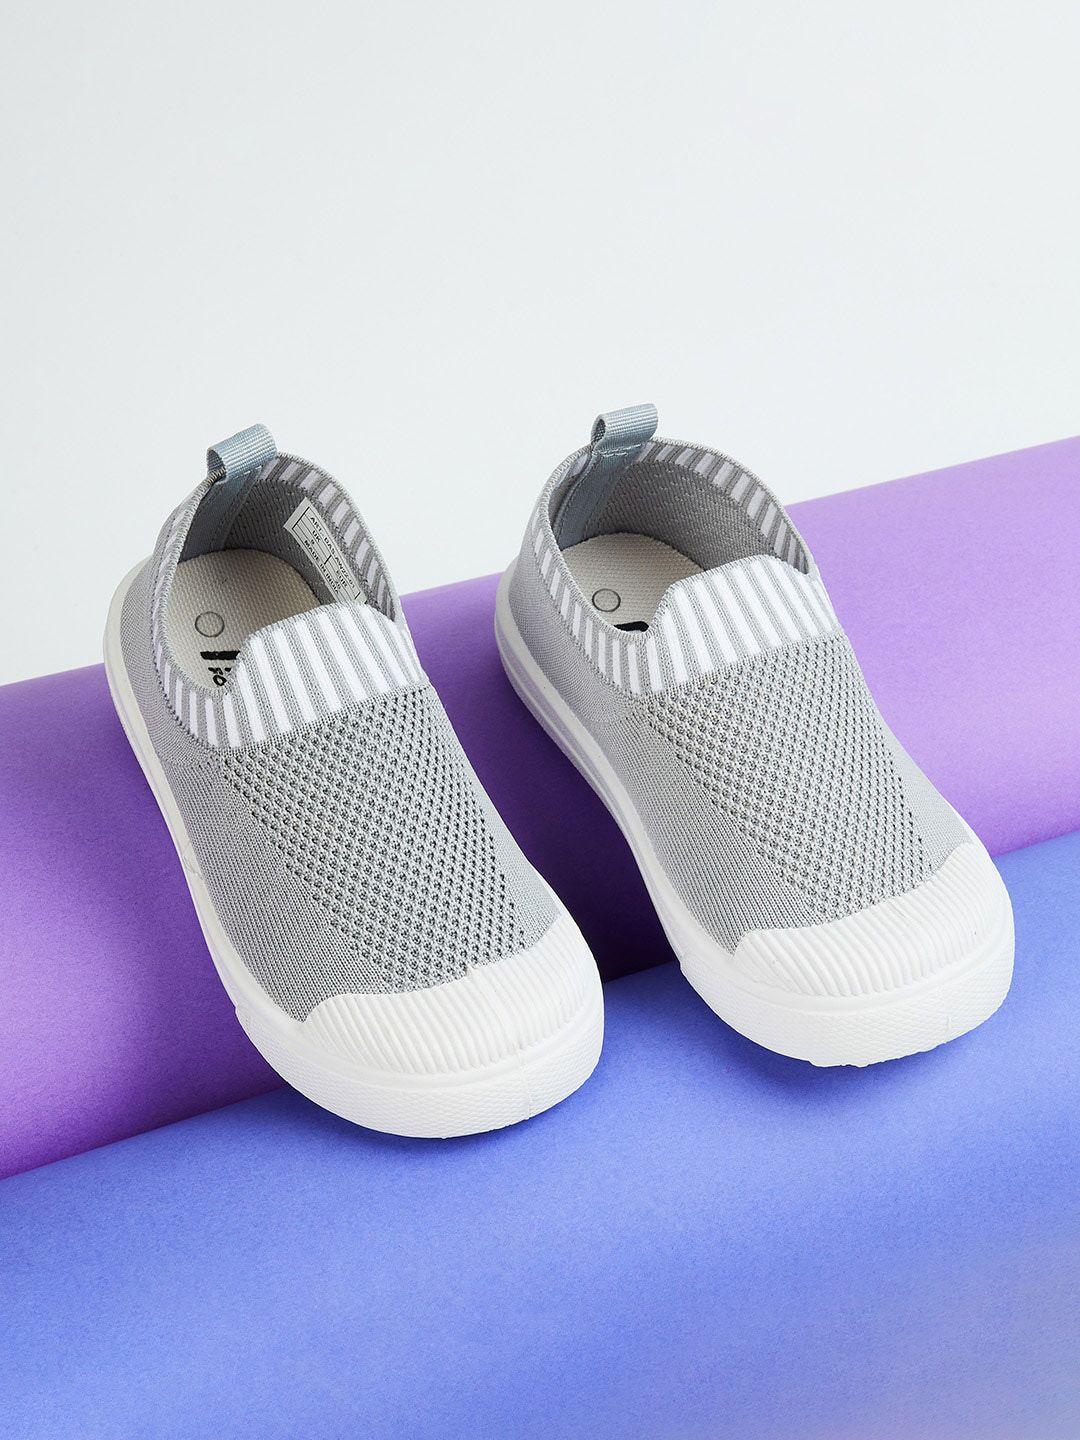 fame-forever-by-lifestyle-boys-grey-striped-slip-on-sneakers